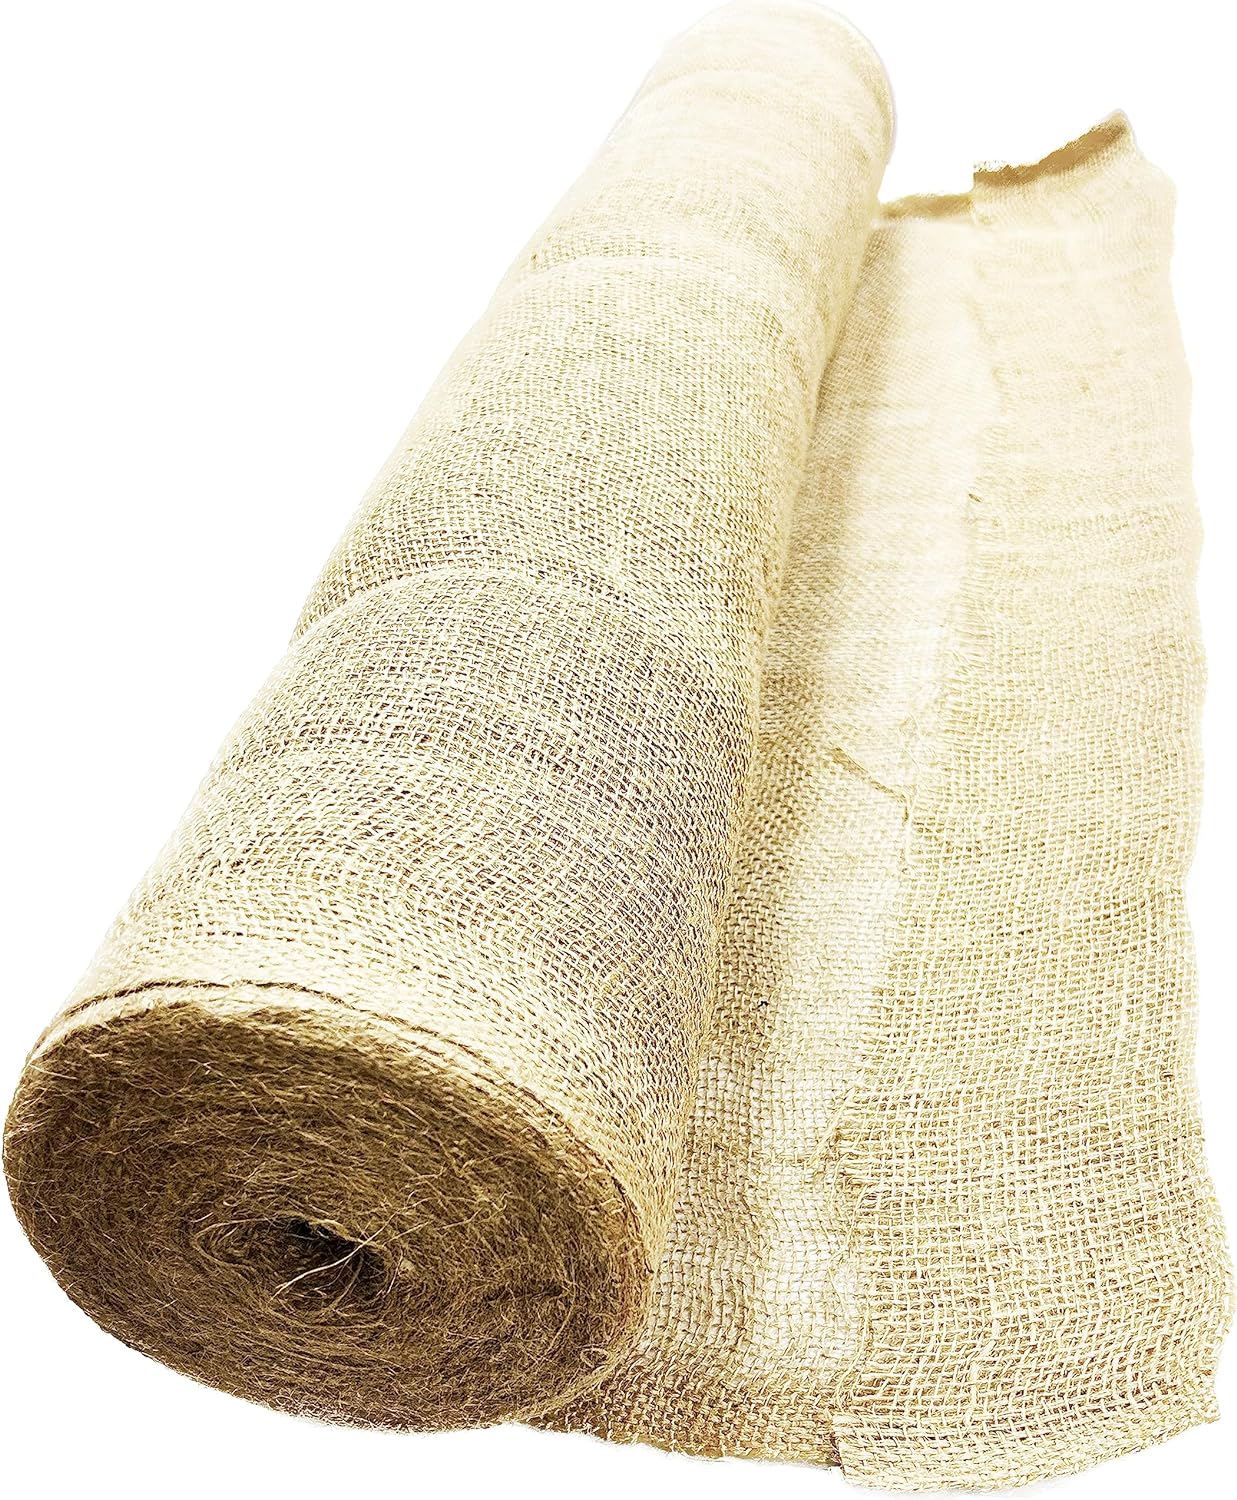  Wedding Aisle Runner Burlap Roll Jute Fabric with Twines 